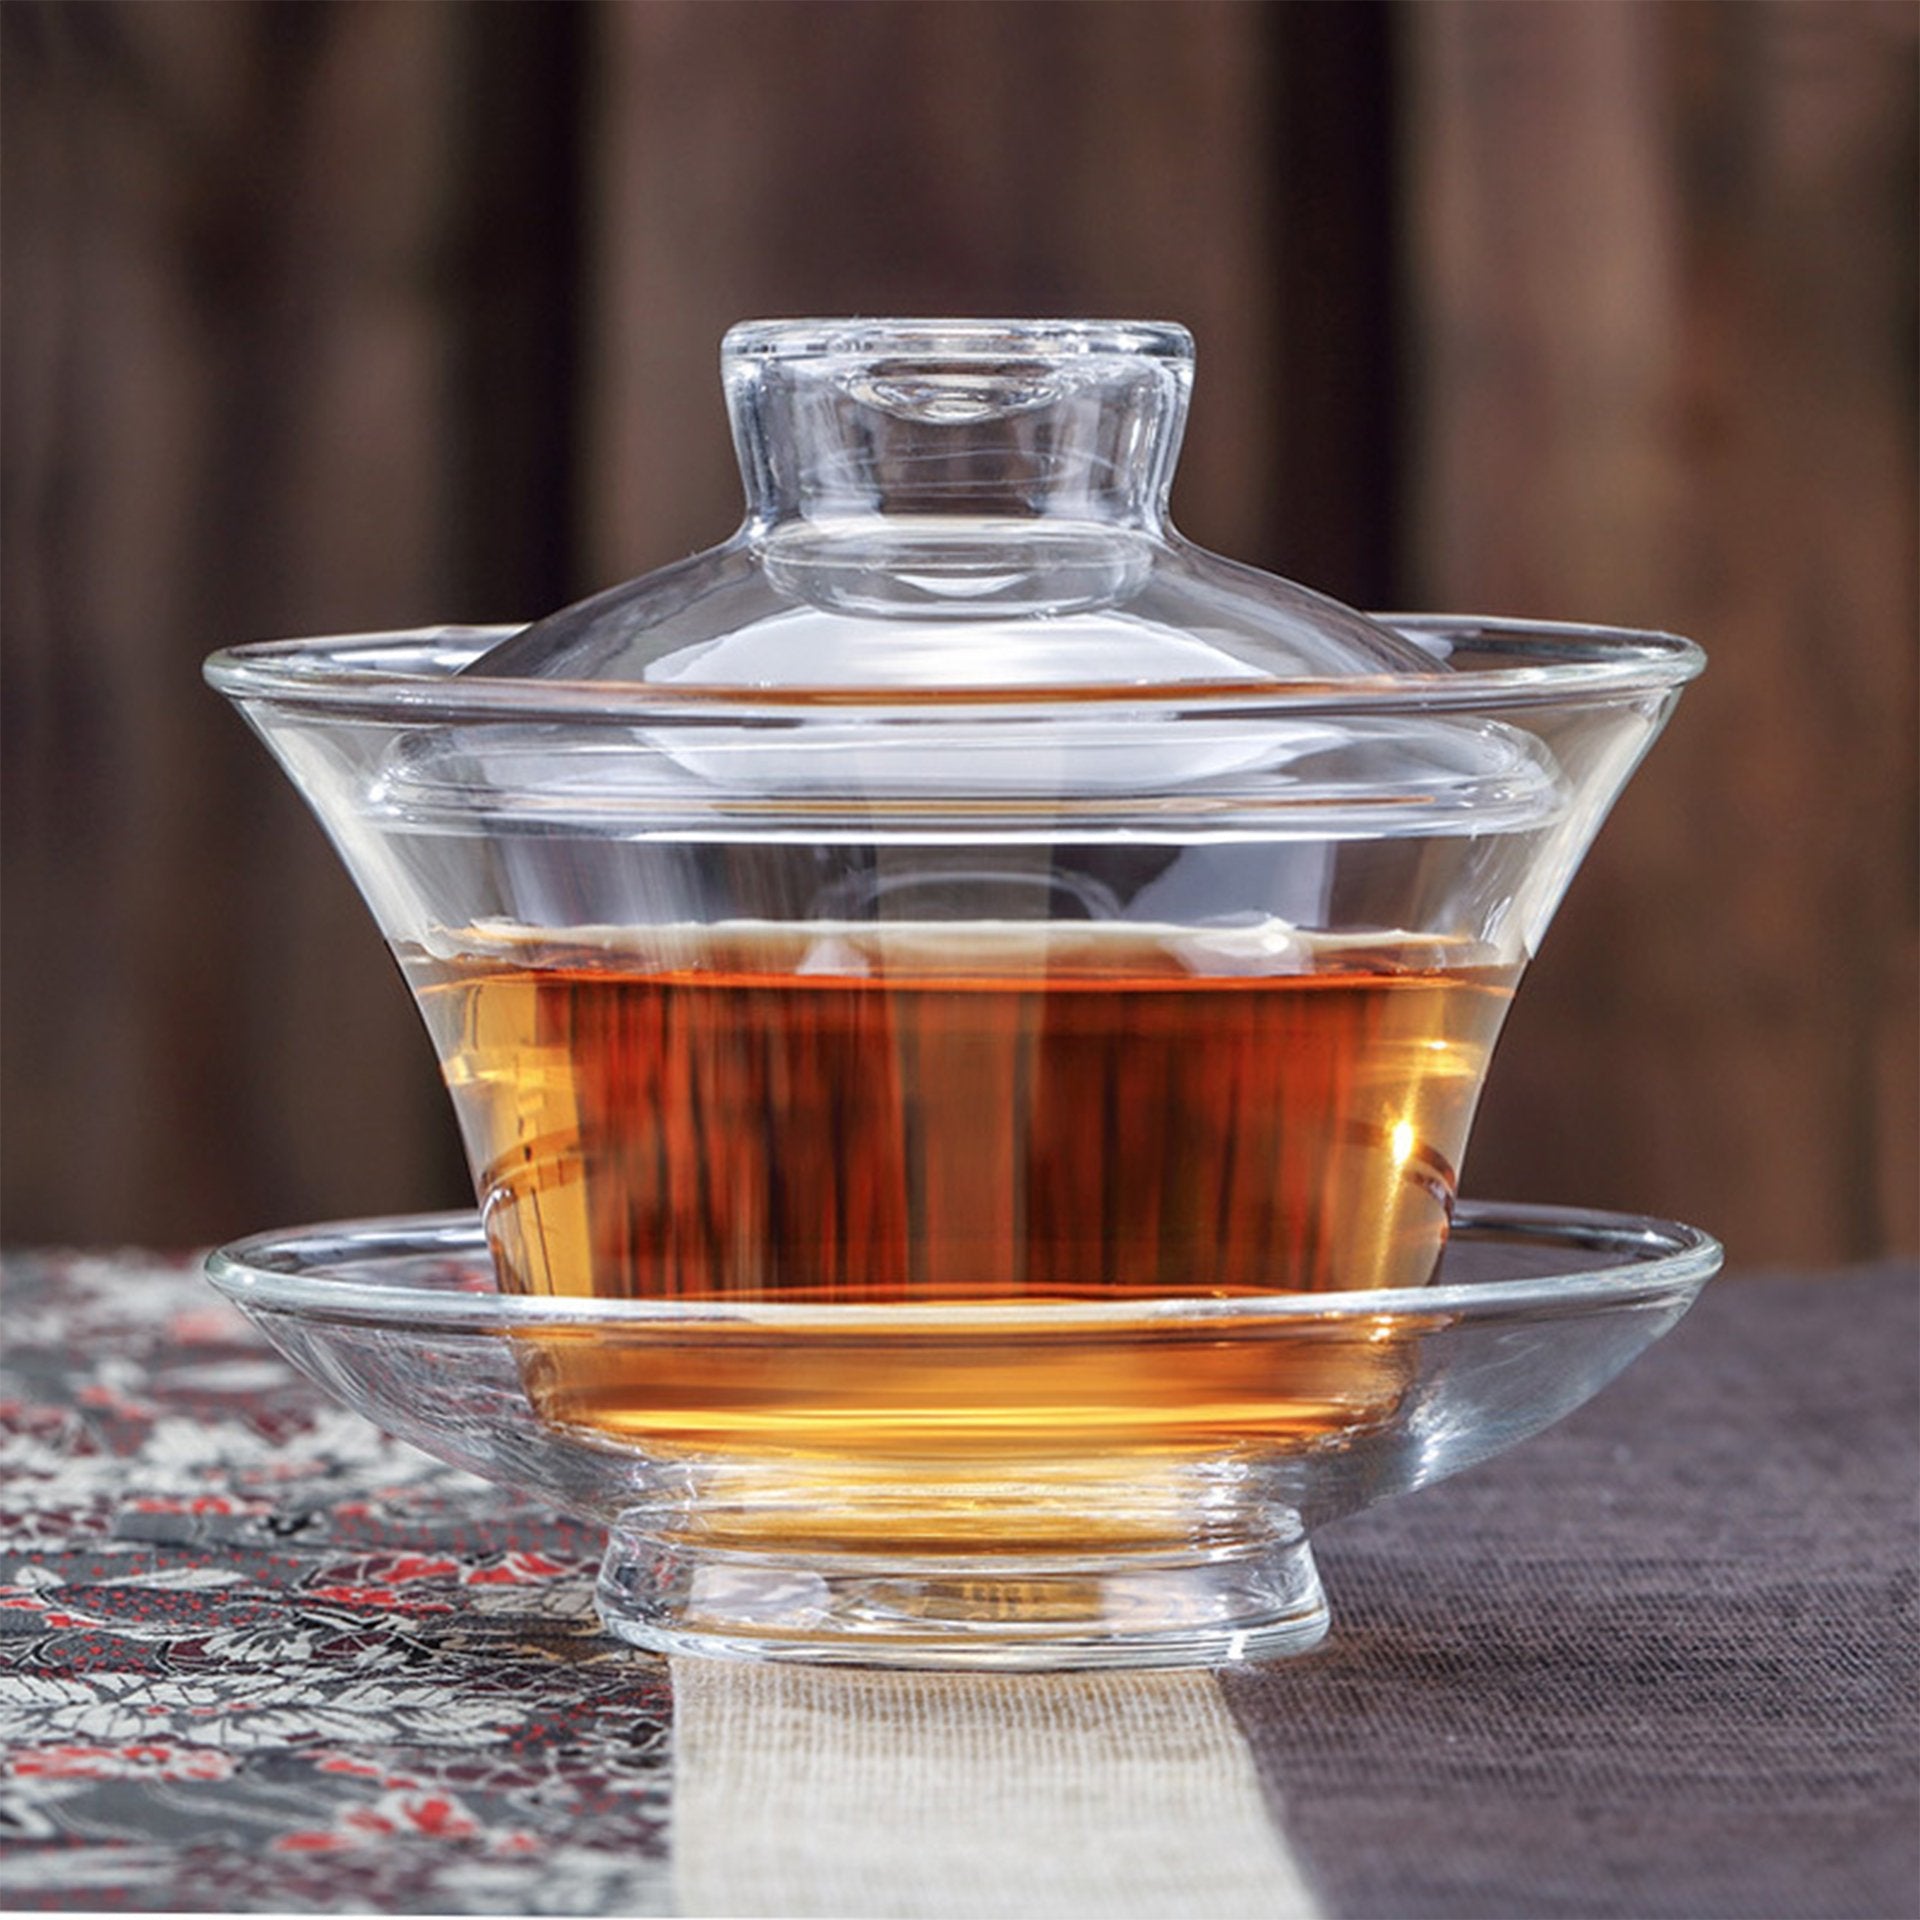 Clear glass gaiwan teapot filled with tea.